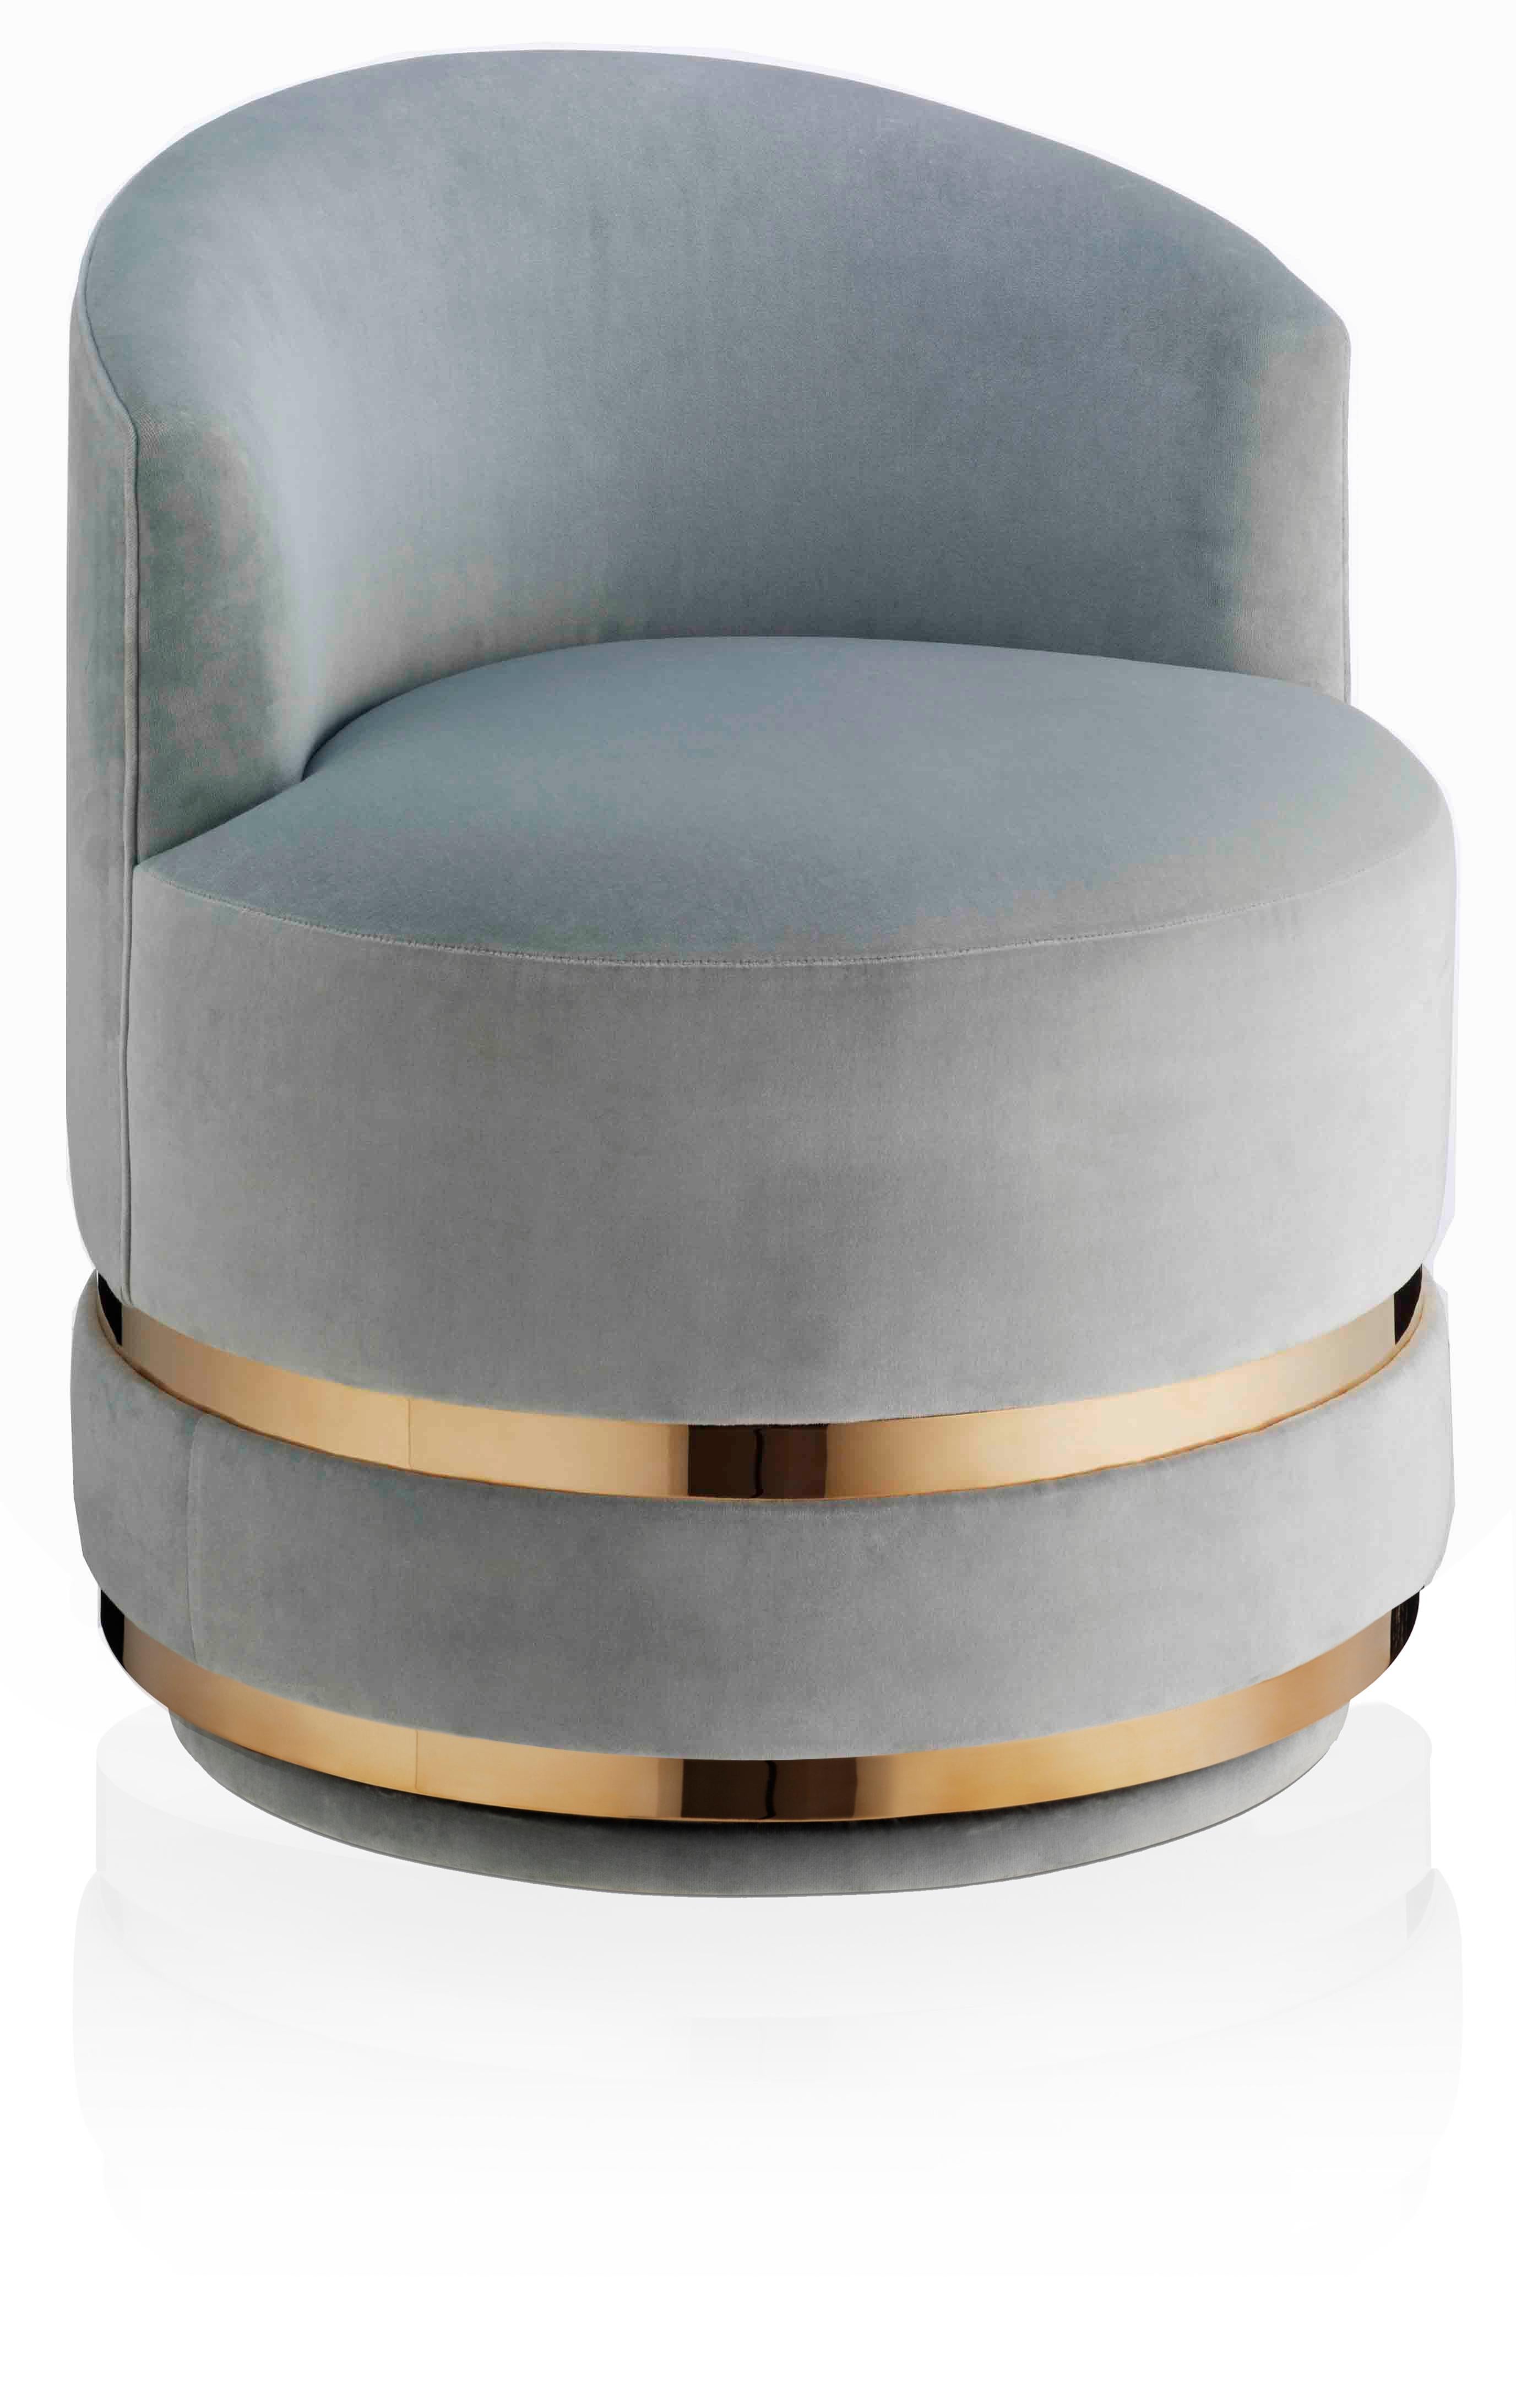 Elegantly sculpted with a contemporary silhouette, this swivel chair is perfect for the dressing room or bedroom.

The deep padded seat and back rest design is upholstered in a choice of rich fabrics and strikingly offset with a polished brass metal